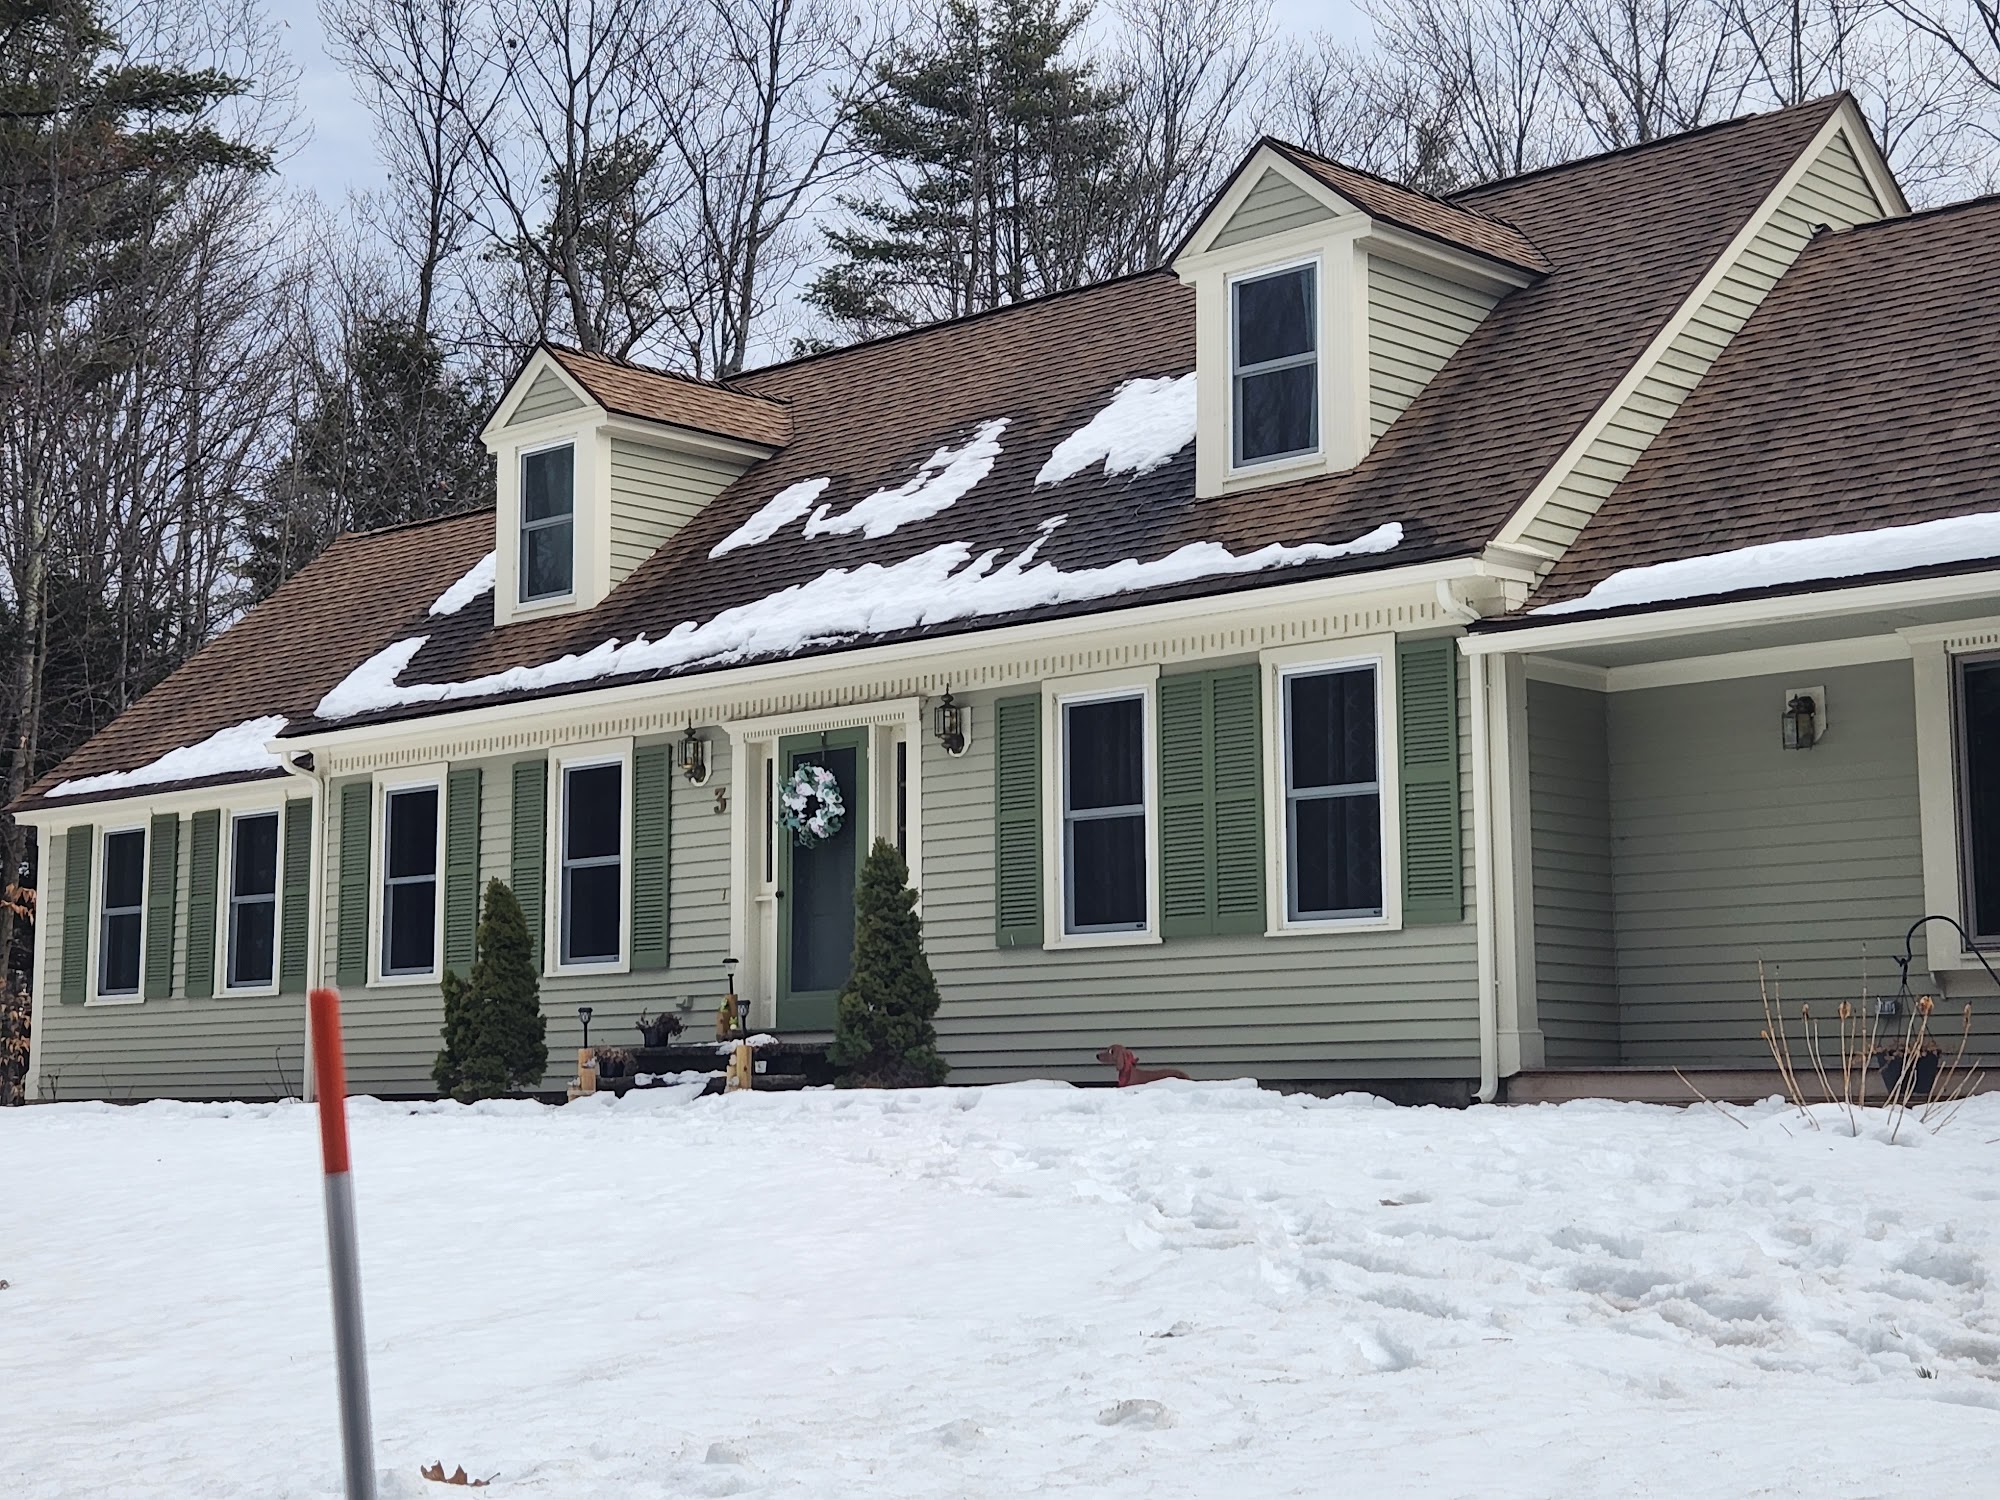 Legacy Gutter Solutions Inc. 1090 A Nh Rte 119, Rindge New Hampshire 03461